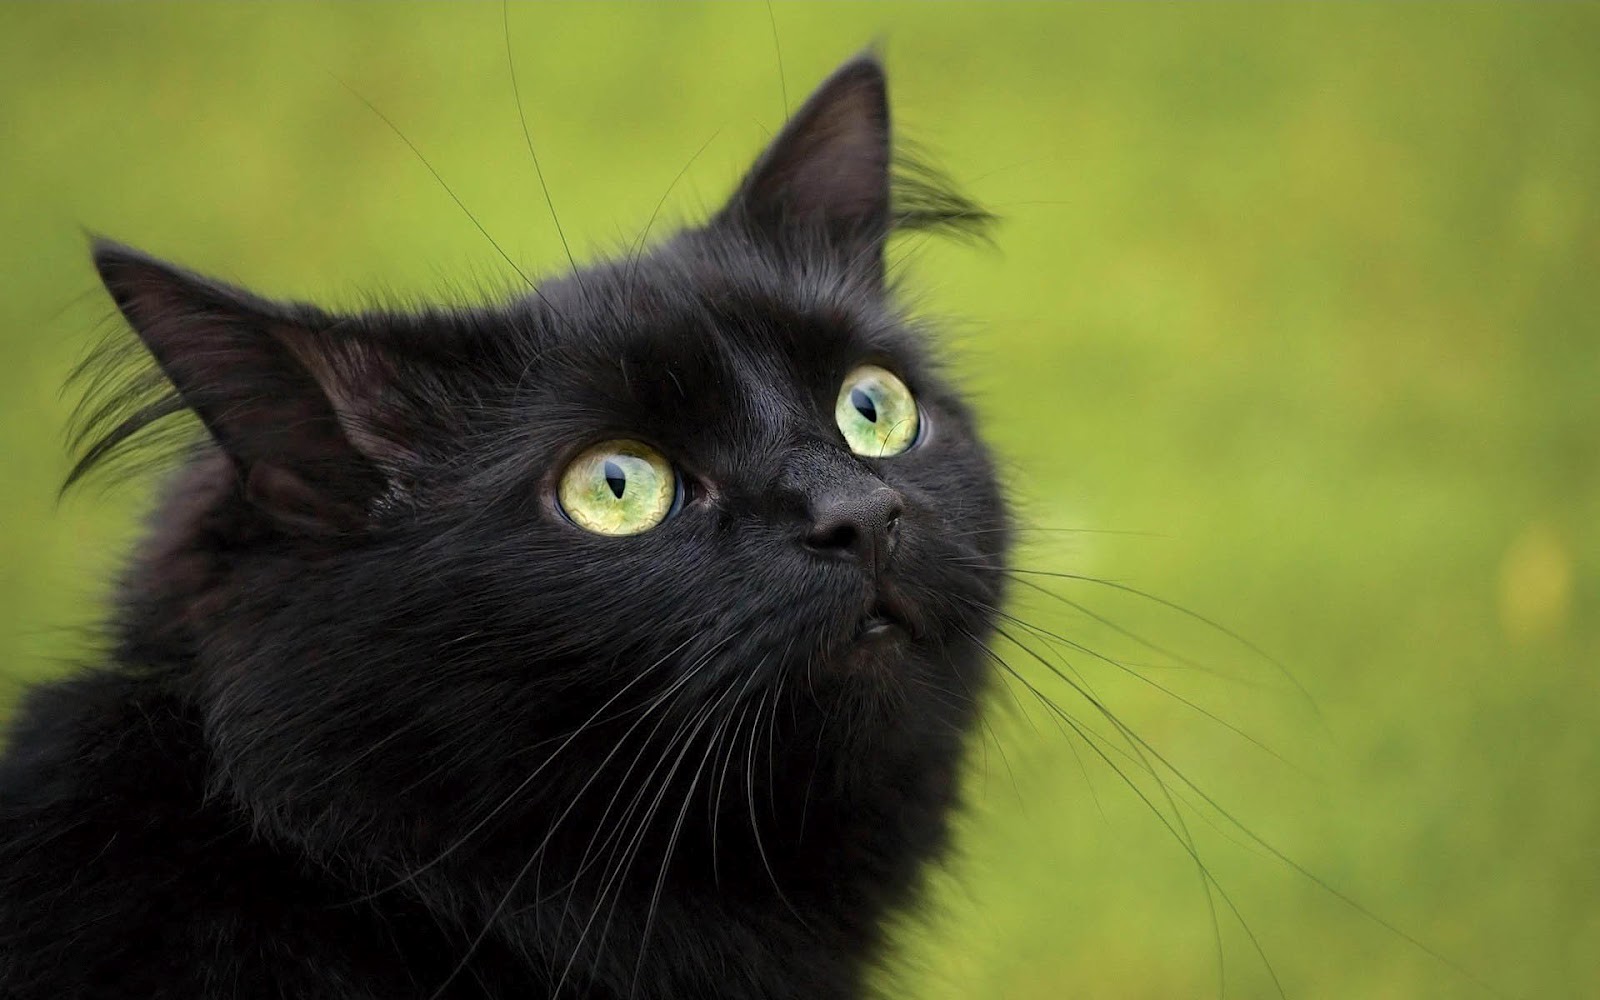 hd cats wallpaper with a black cat with green eyes hd cats wallpapers 1600x1000